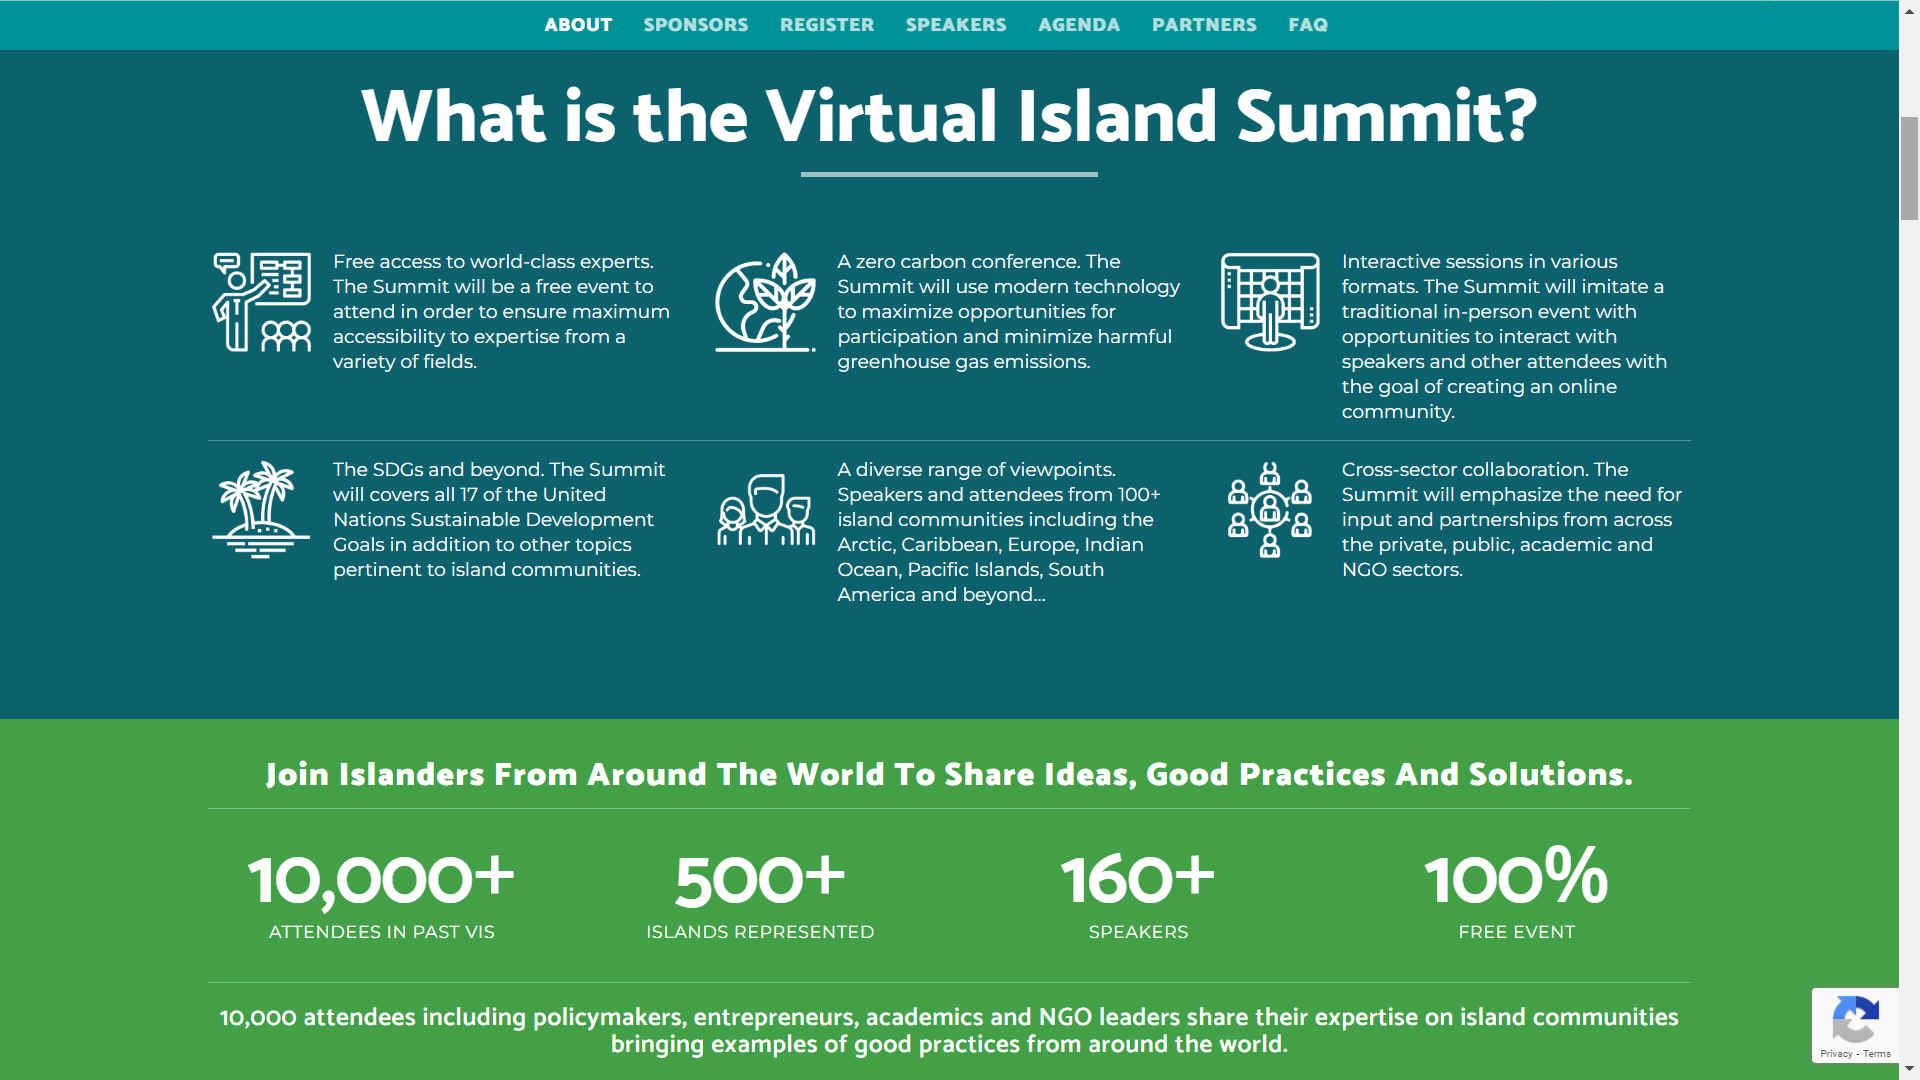 What is the Virtual Island Summit?